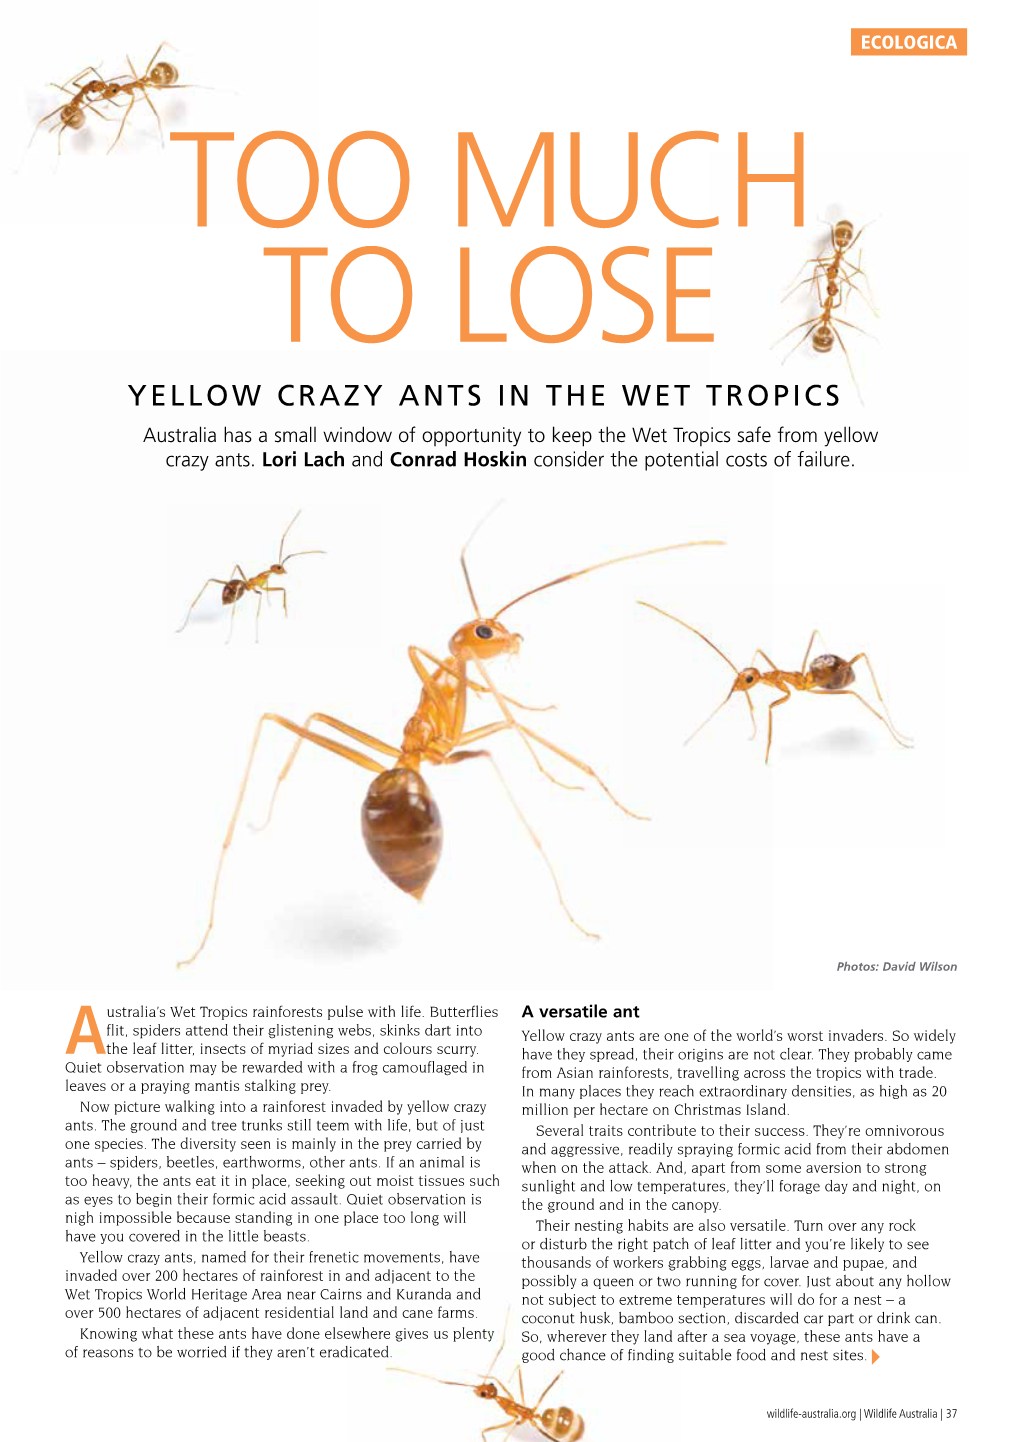 YELLOW CRAZY ANTS in the WET TROPICS Australia Has a Small Window of Opportunity to Keep the Wet Tropics Safe from Yellow Crazy Ants